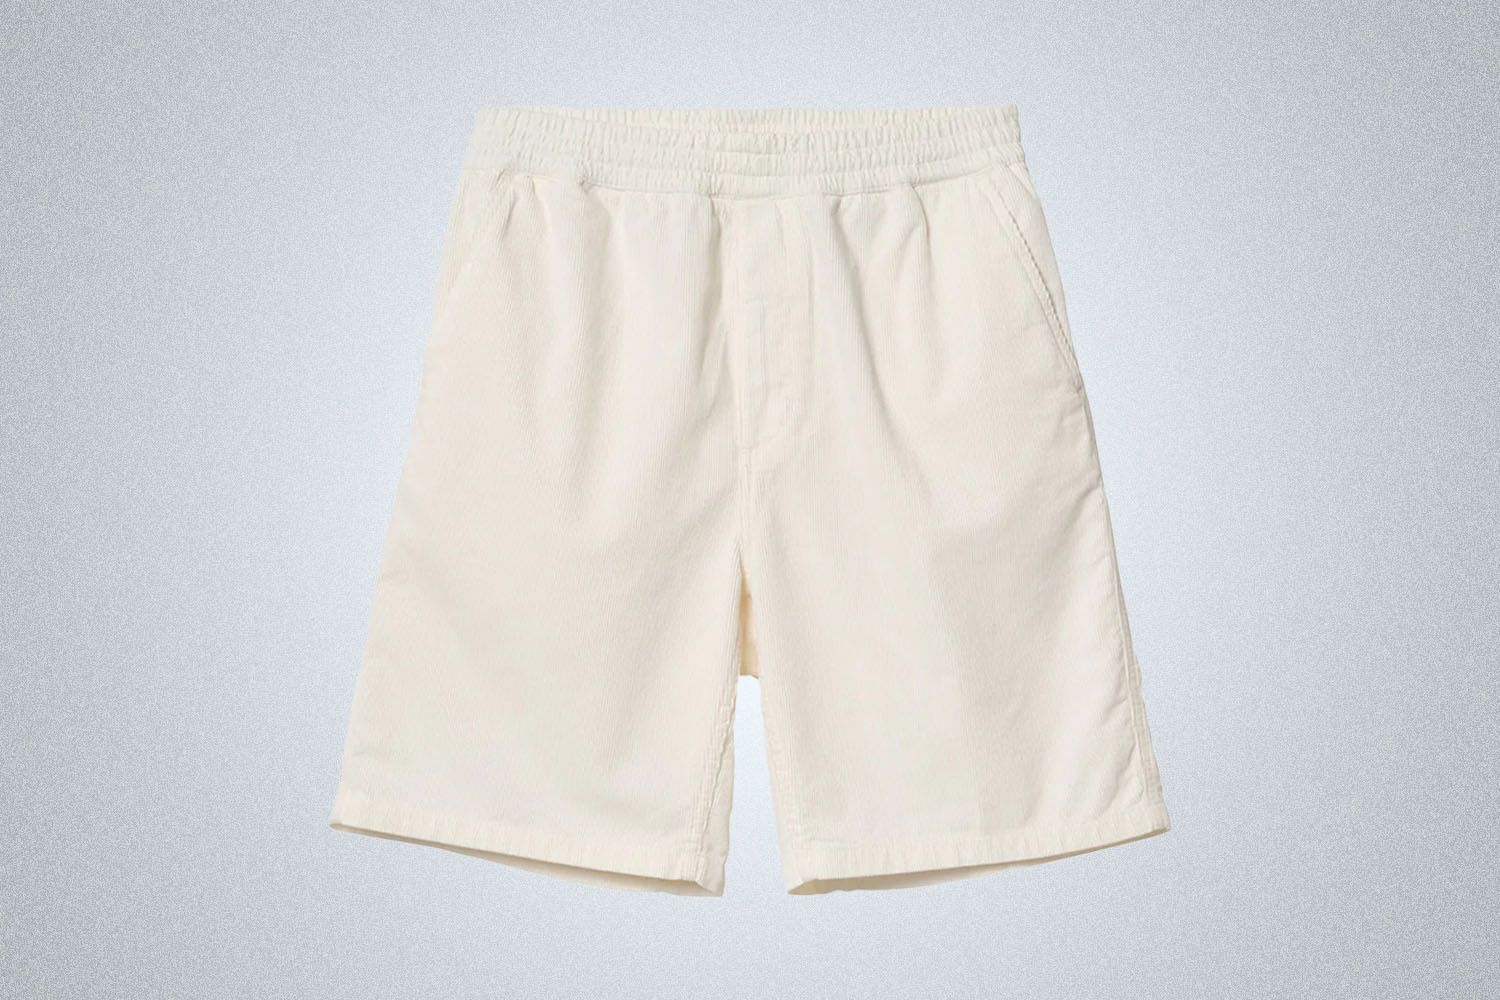 a pair of white Carhartt WIP corduroy shorts on a grey background